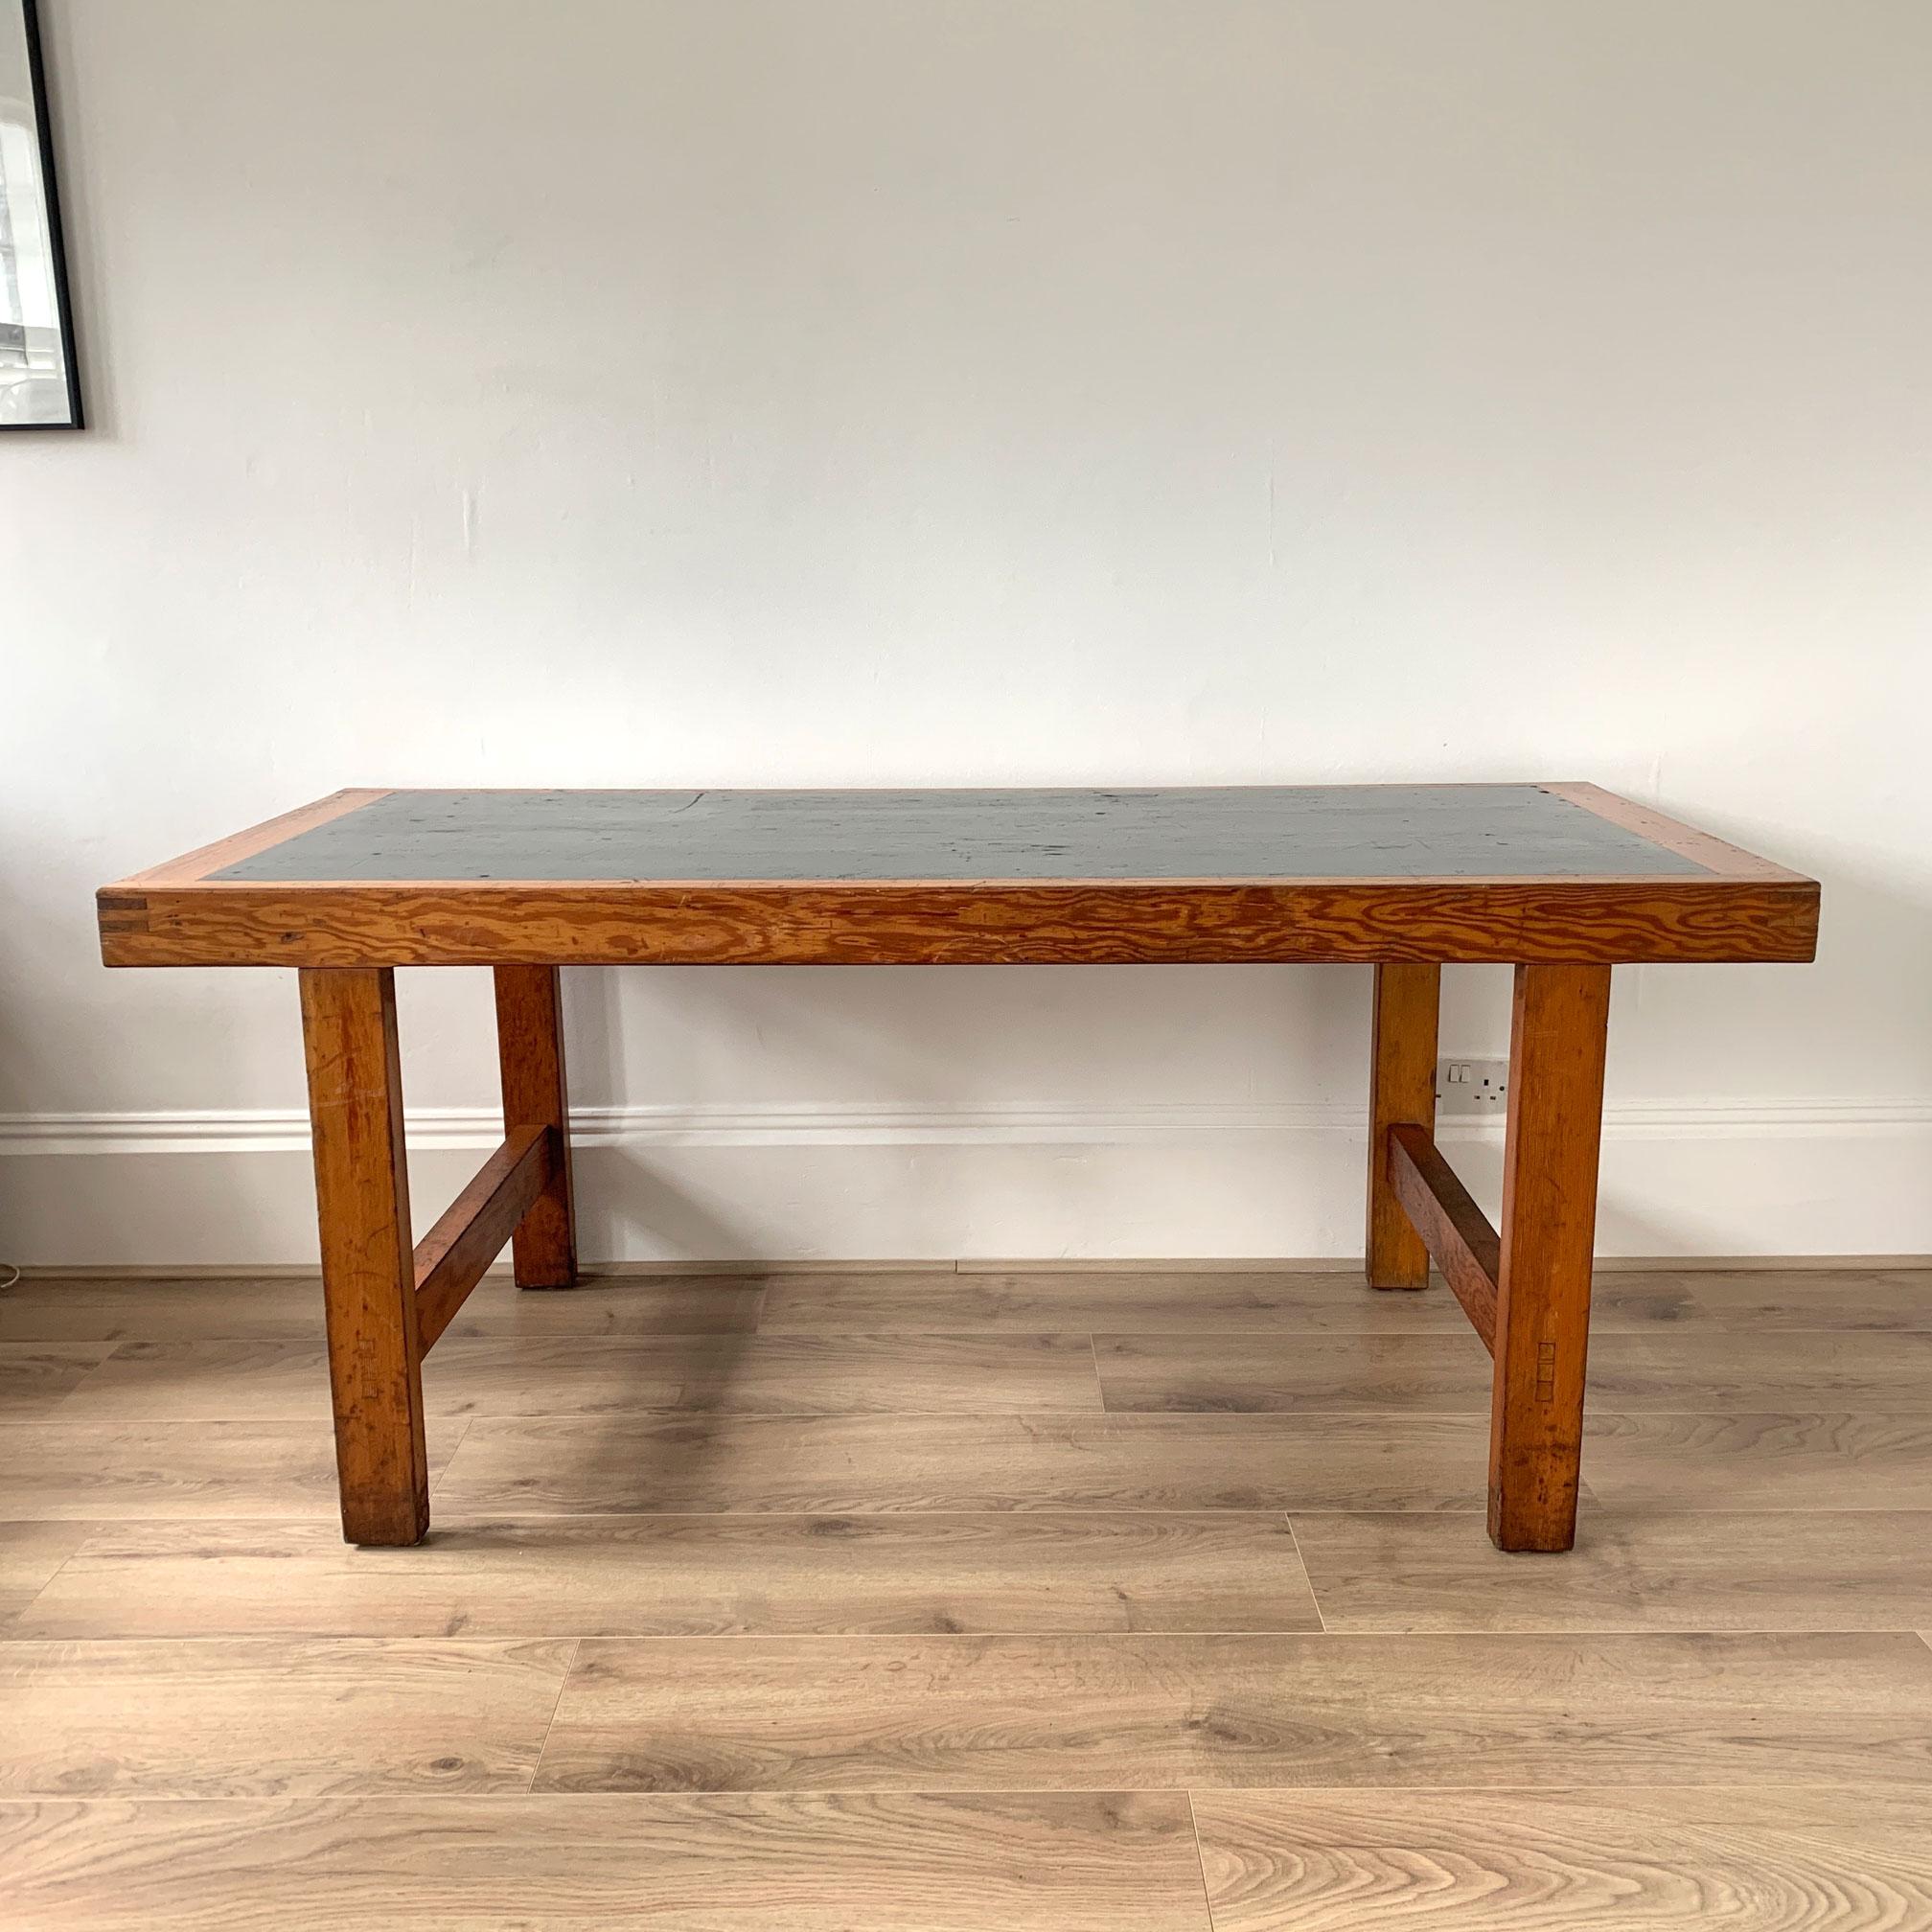 Solid Wood, Sturdy Table, with Patina

H:71 W:168 D:76 cm